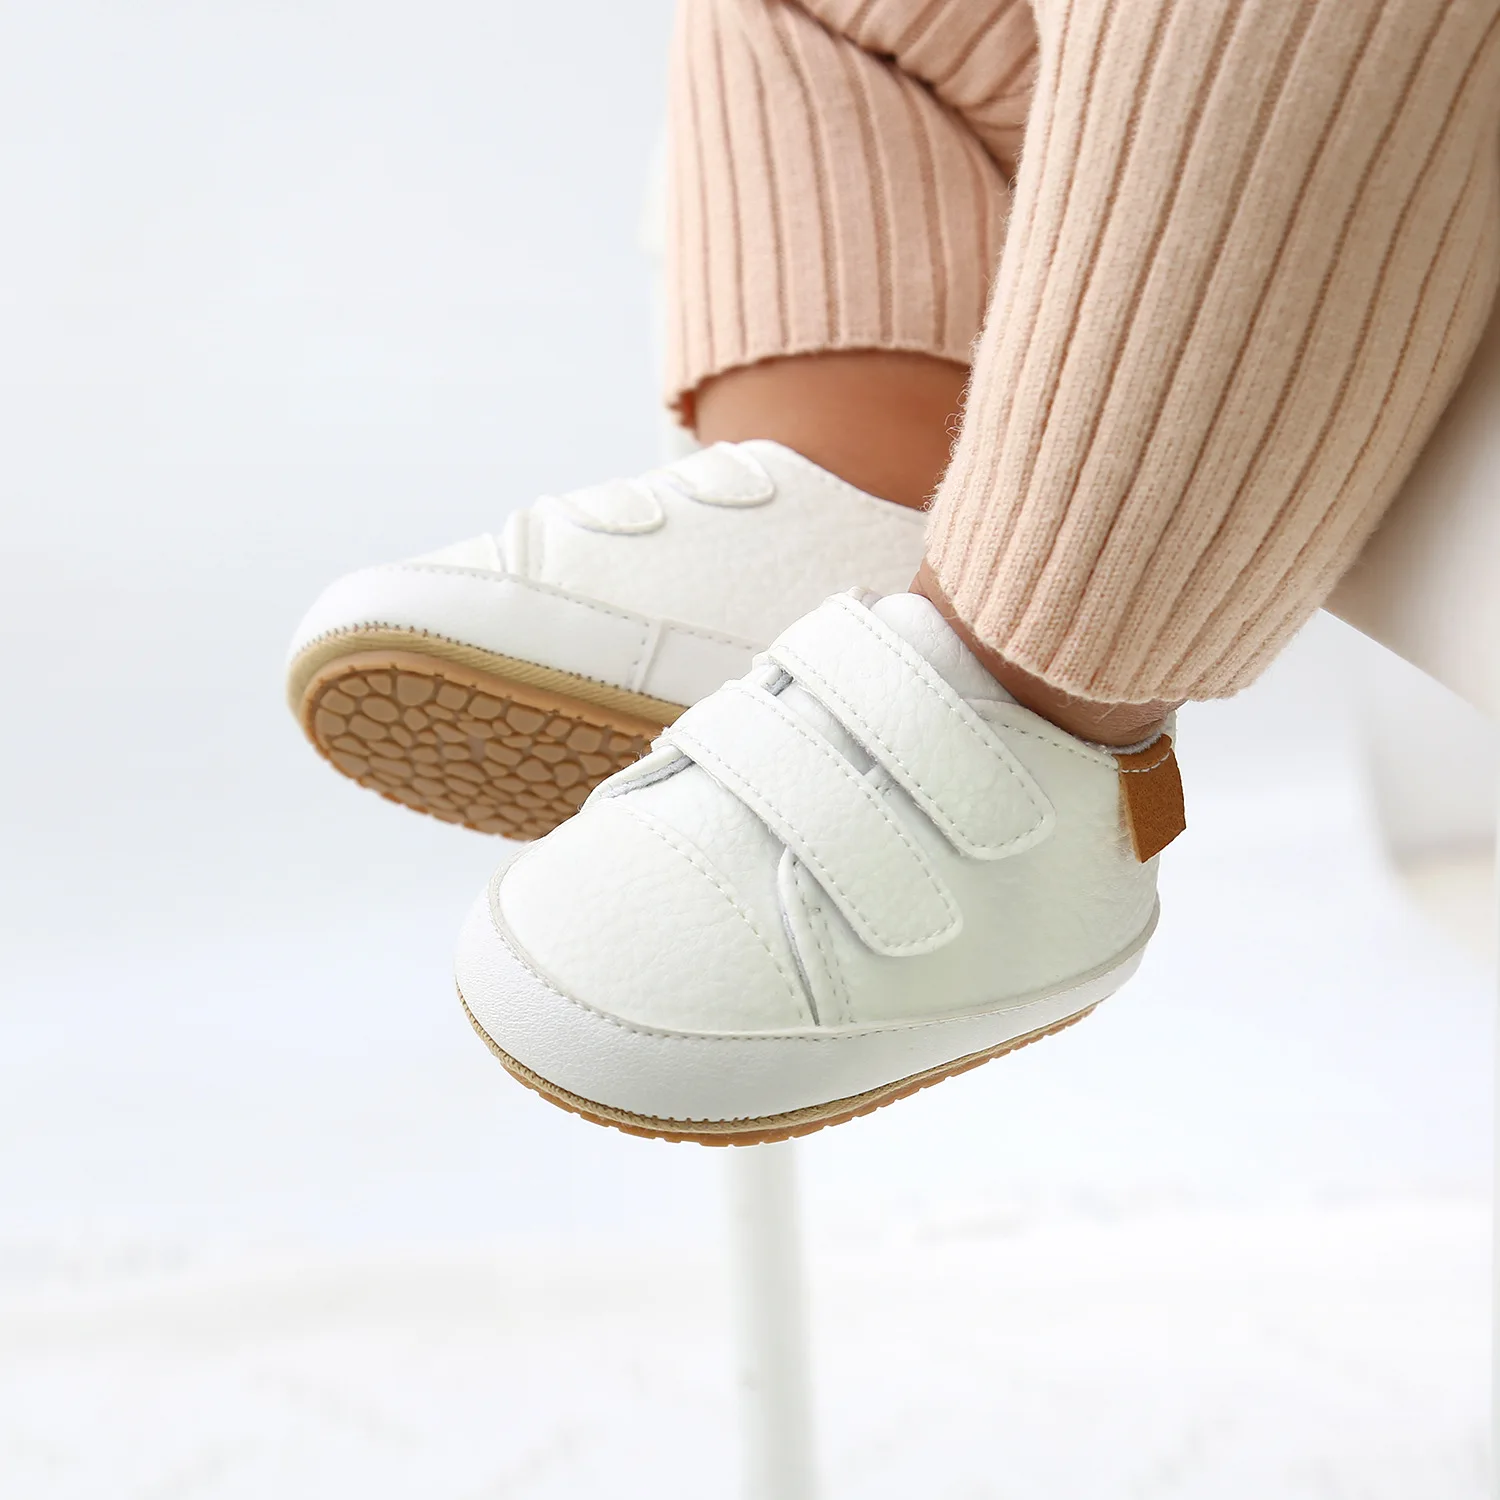 

6200 Newborn Baby Shoes Boy Girl Sport Soft Sole PU Leather Anti Slip Toddler Infant First Walkers Casual Sneakers Shoes